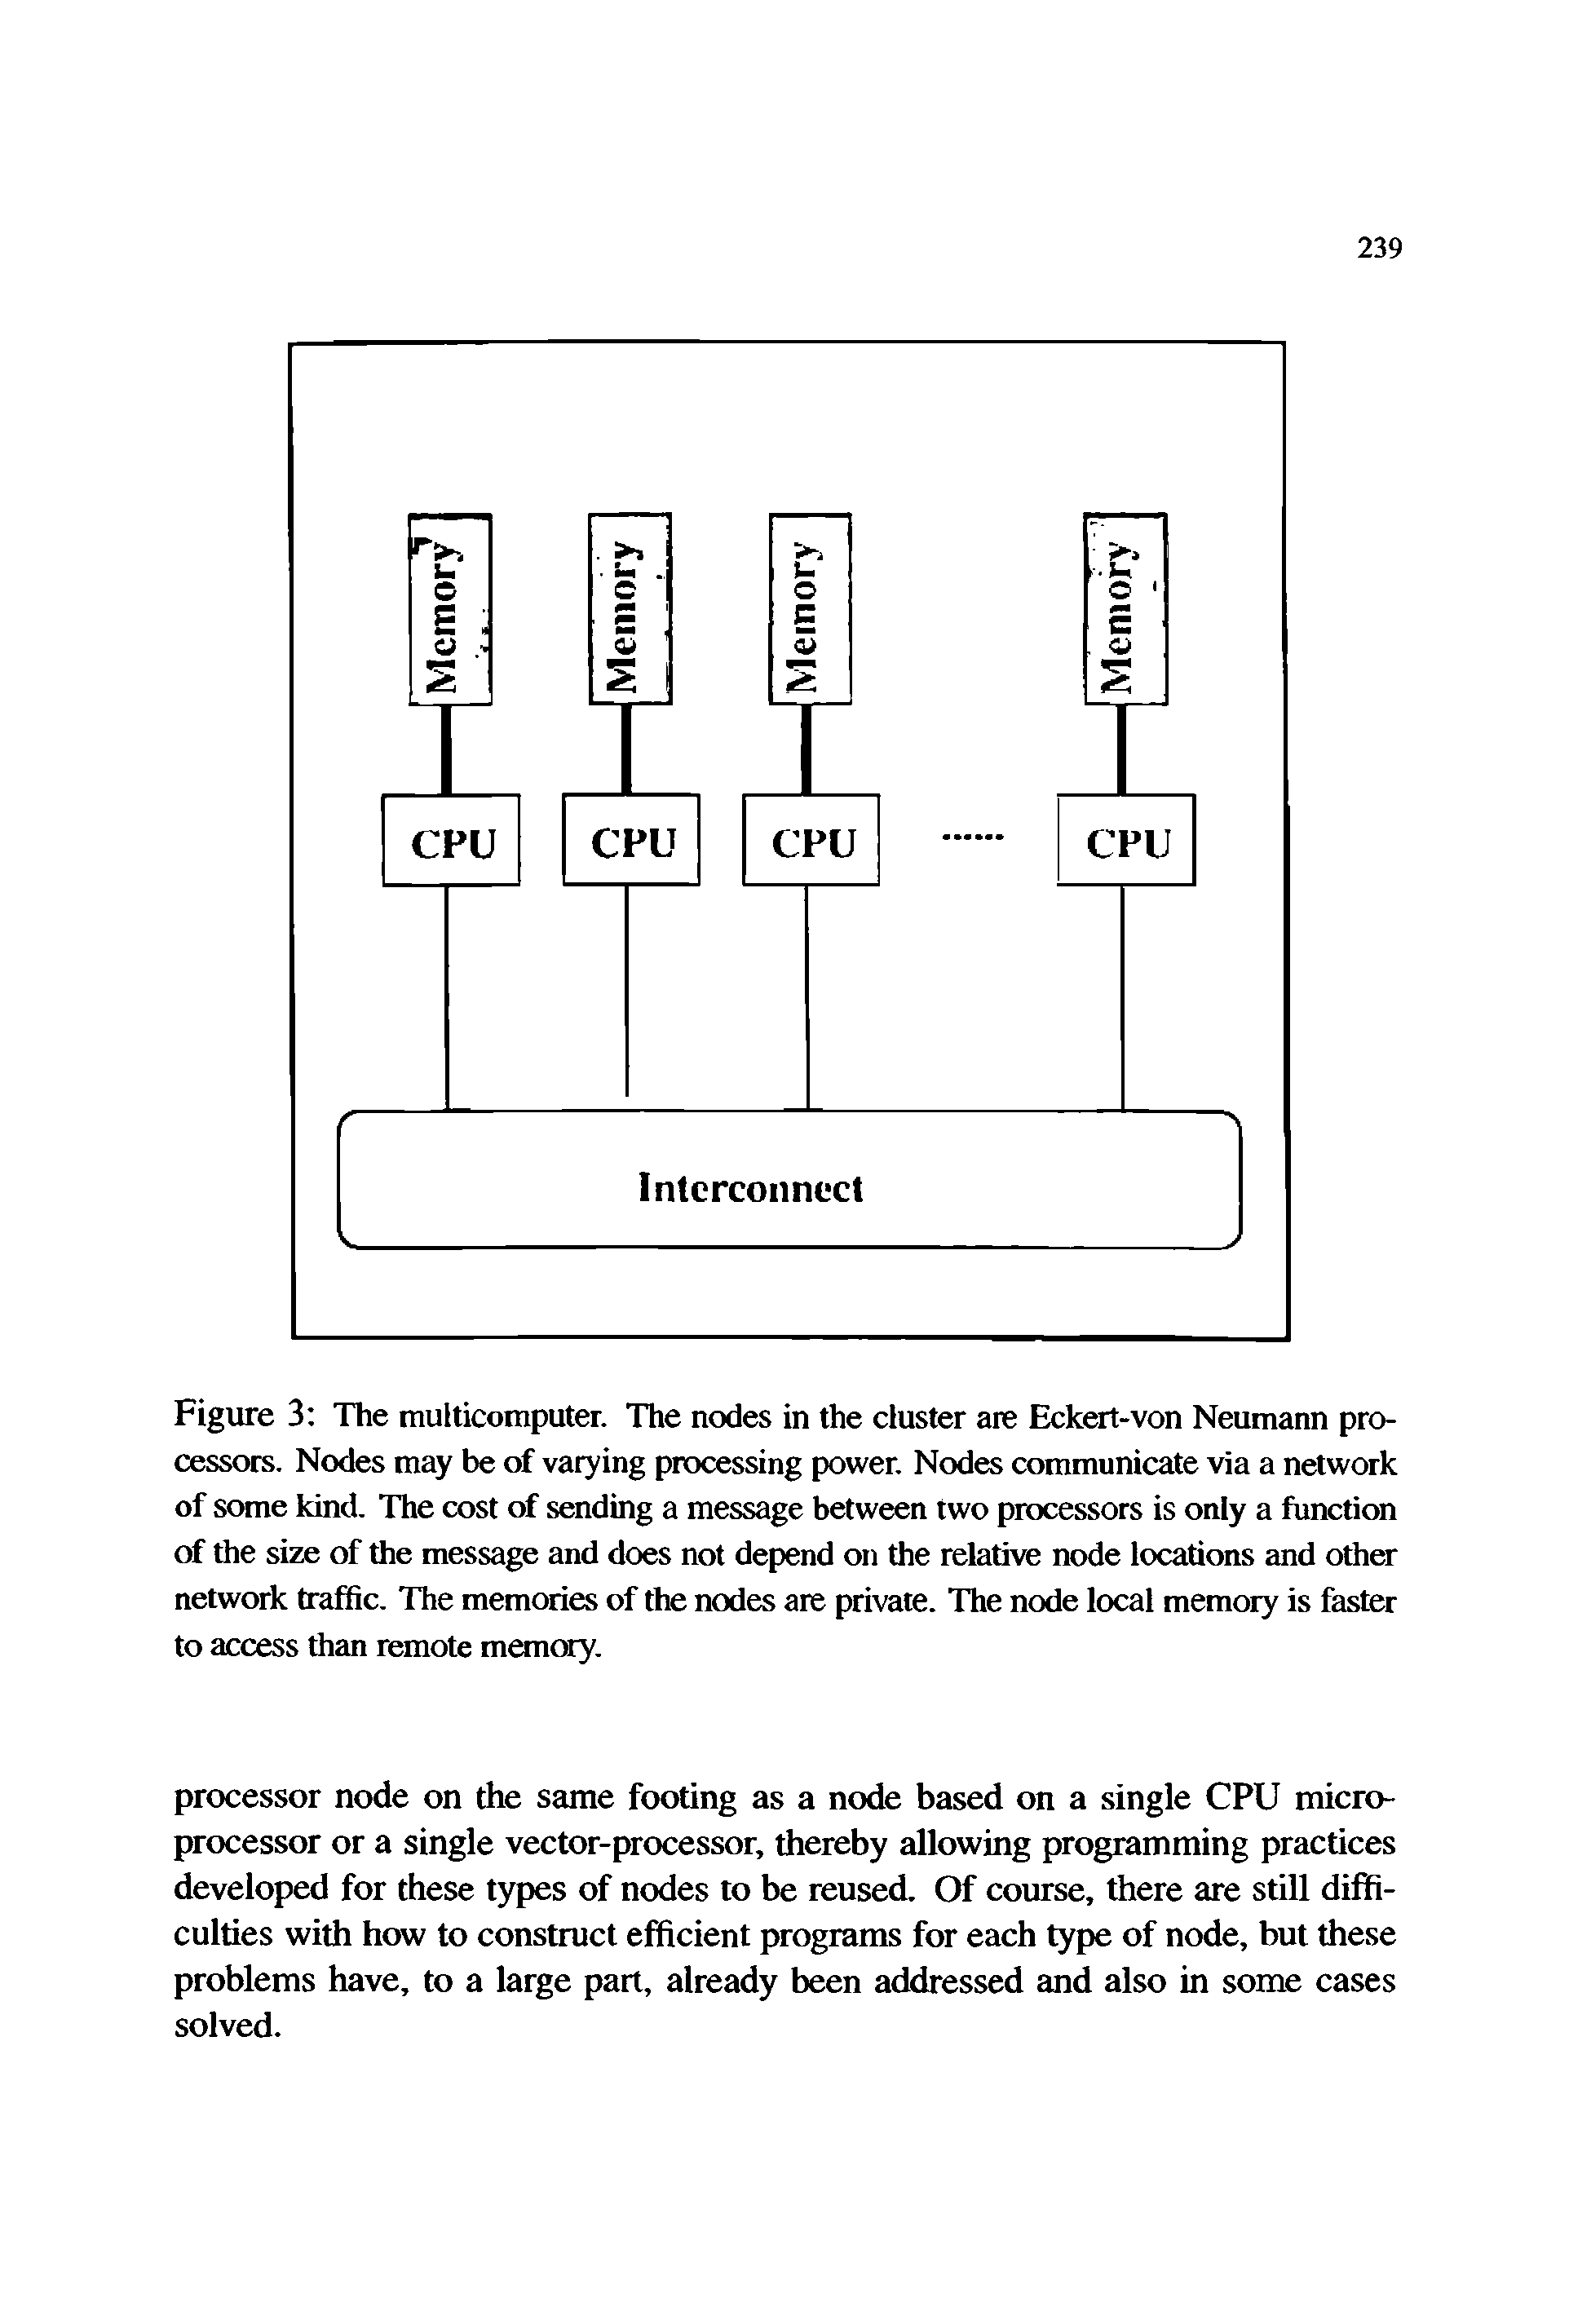 Figure 3 The multicomputer. The nodes in the cluster are Eckert-von Neumann processors. Nodes may be of varying processing power. Nodes communicate via a network of some kind. The cost of sending a message between two processors is only a function of the size of the message and does not depend on the relative node locations and other network traffic. The memories of the nodes are private. The node local memory is faster to access than remote memory.